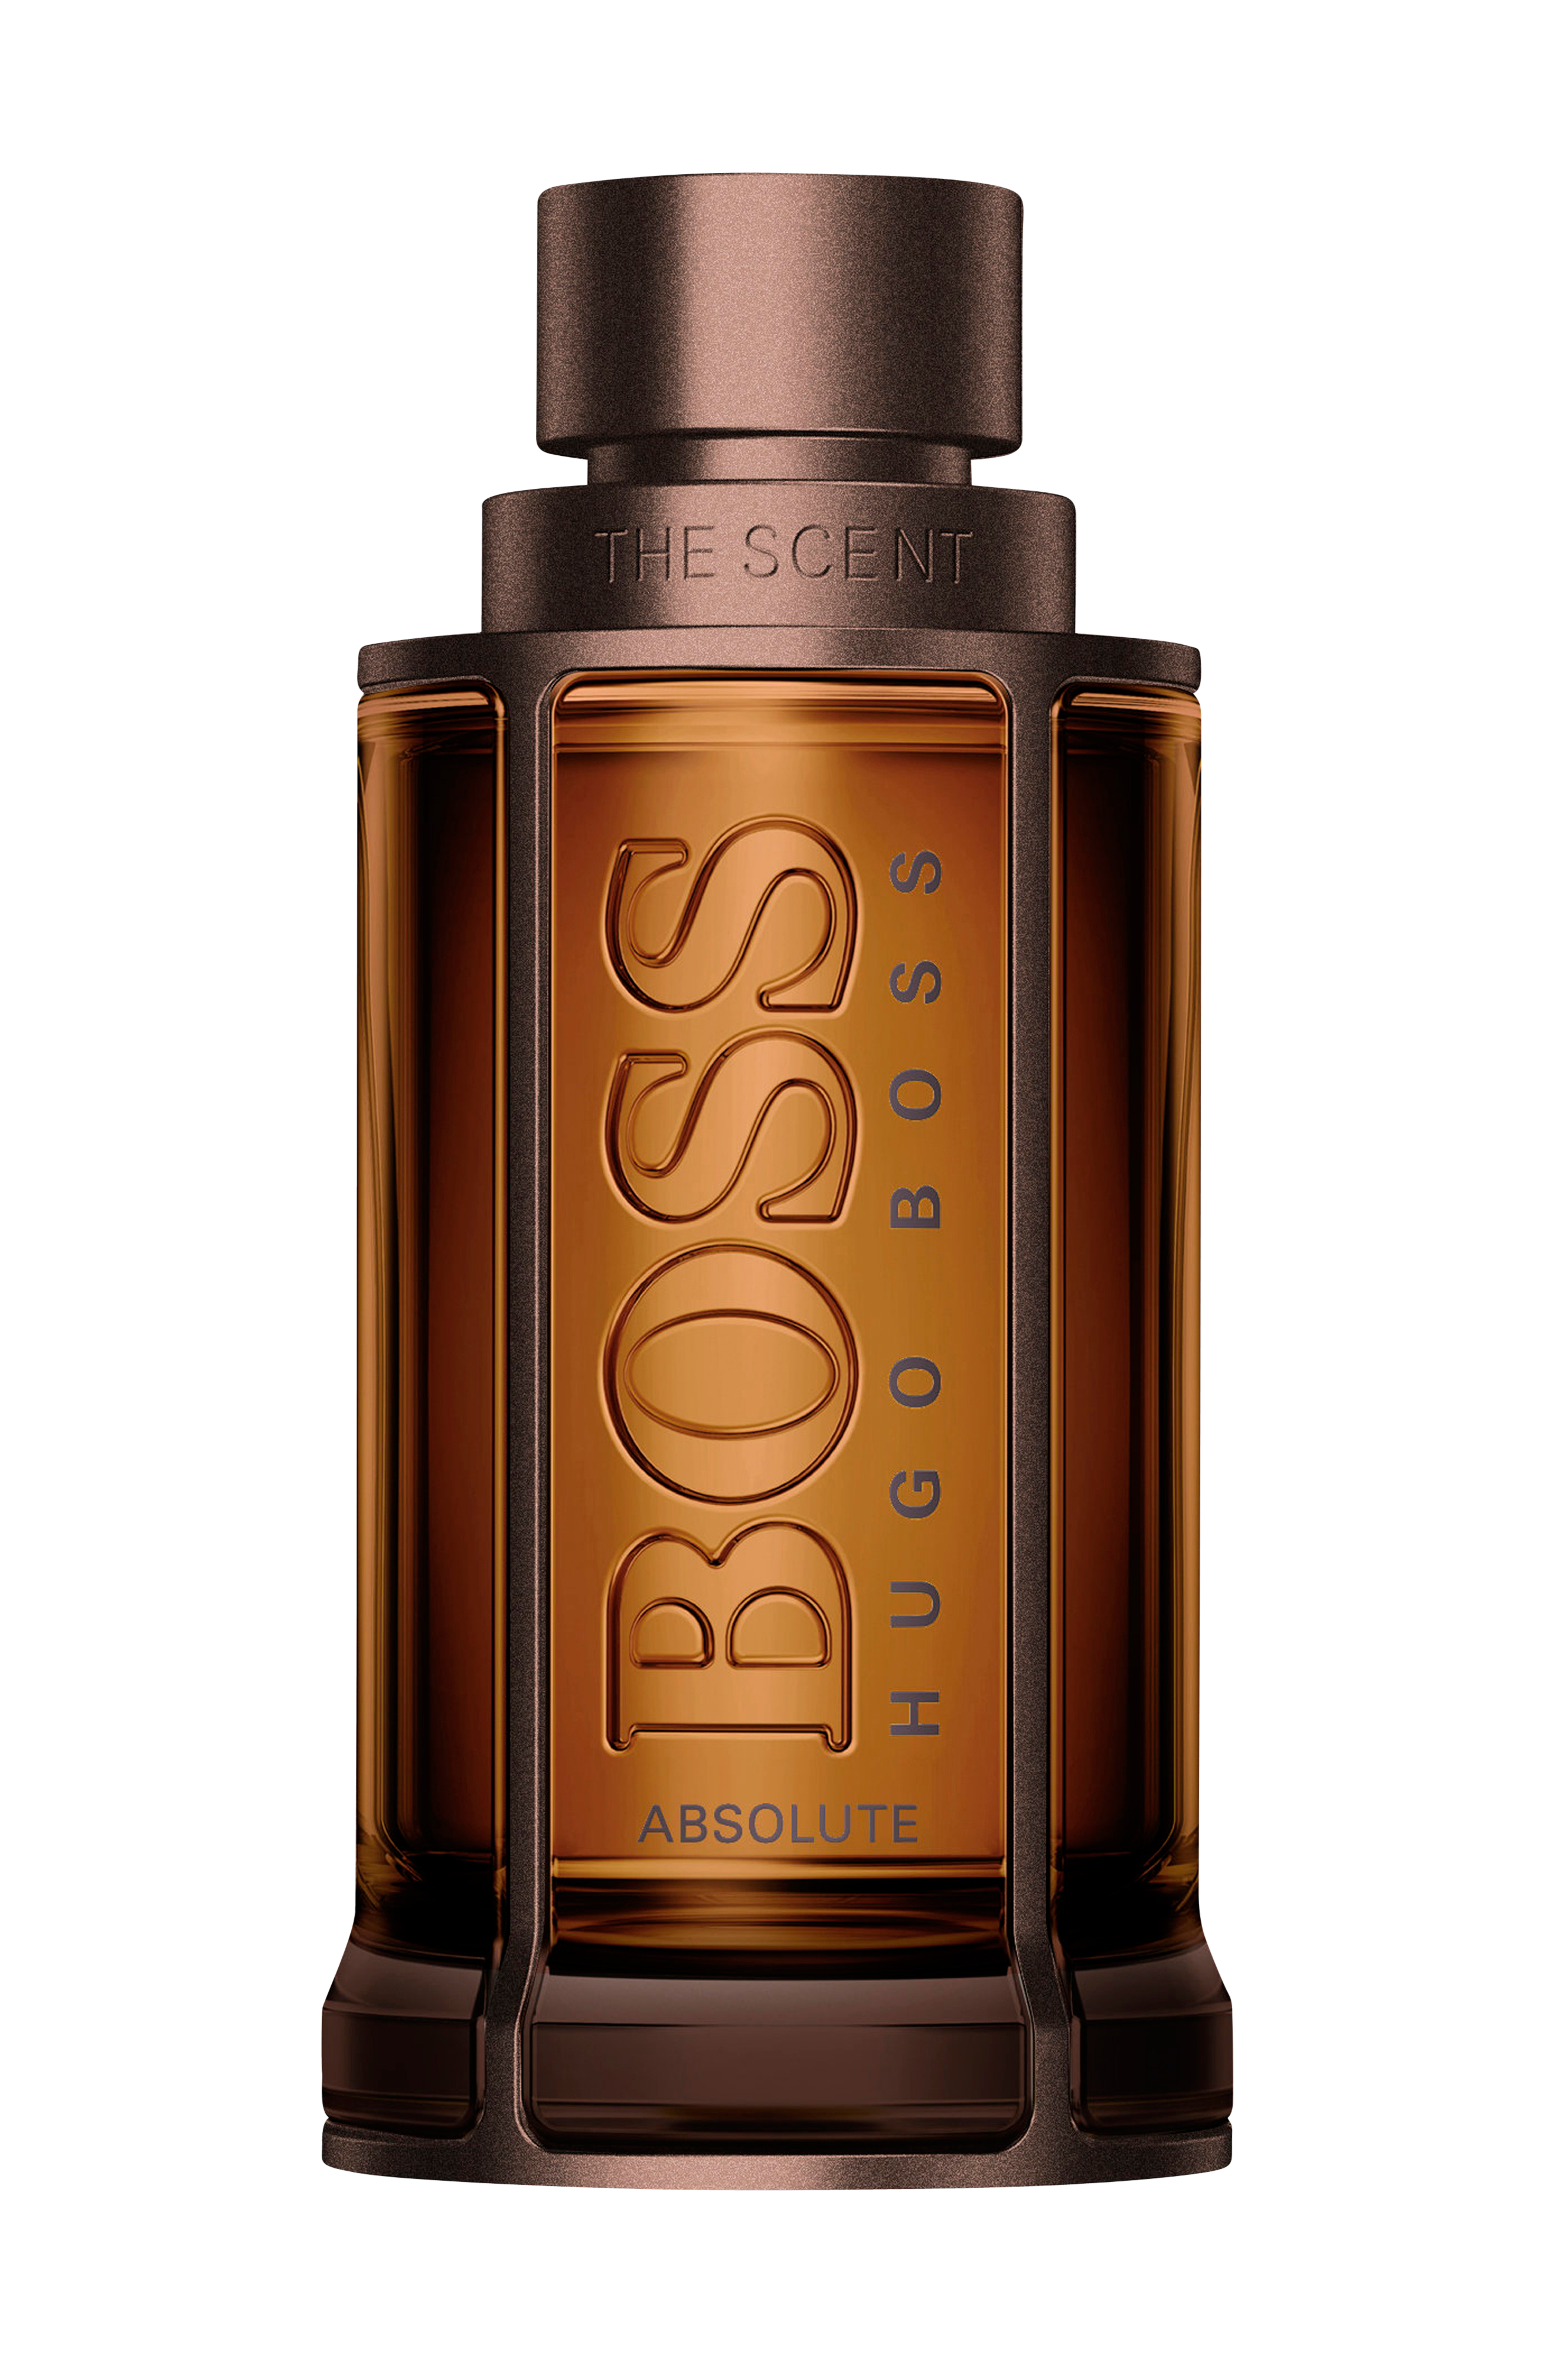 The scent absolute. Hugo Boss the Scent 100 ml. Hugo Boss the Scent Eau de Toilette. Hugo Boss the Scent intense. Boss Hugo Boss the Scent мужские.